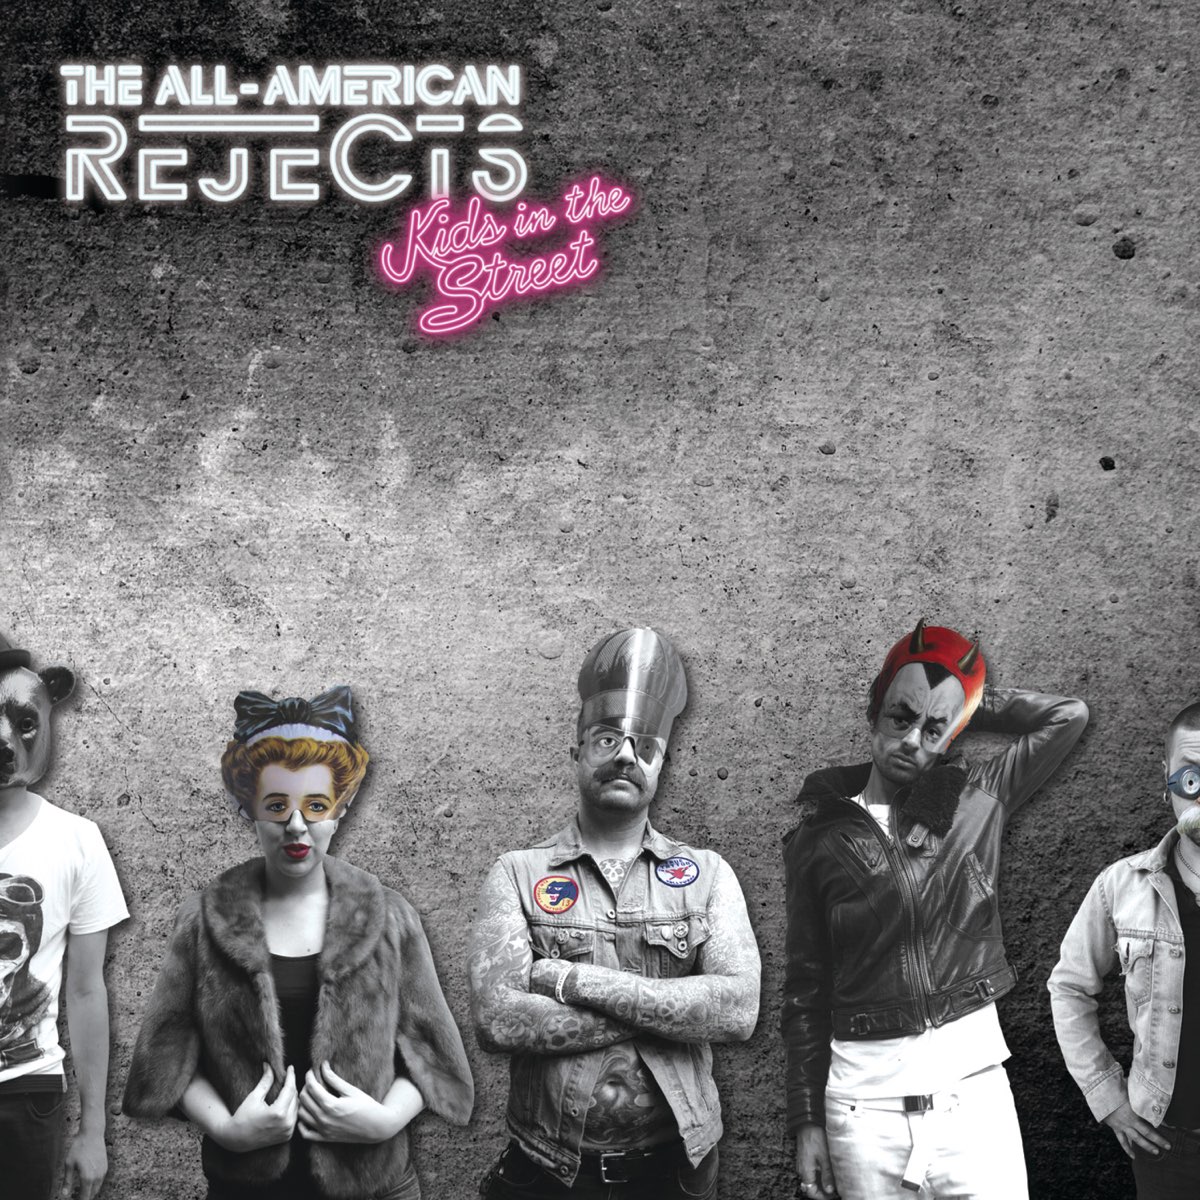 The All-American Rejects - Kids in the Street - Rock Band Blitz Playthrough  (5 Gold Stars) 